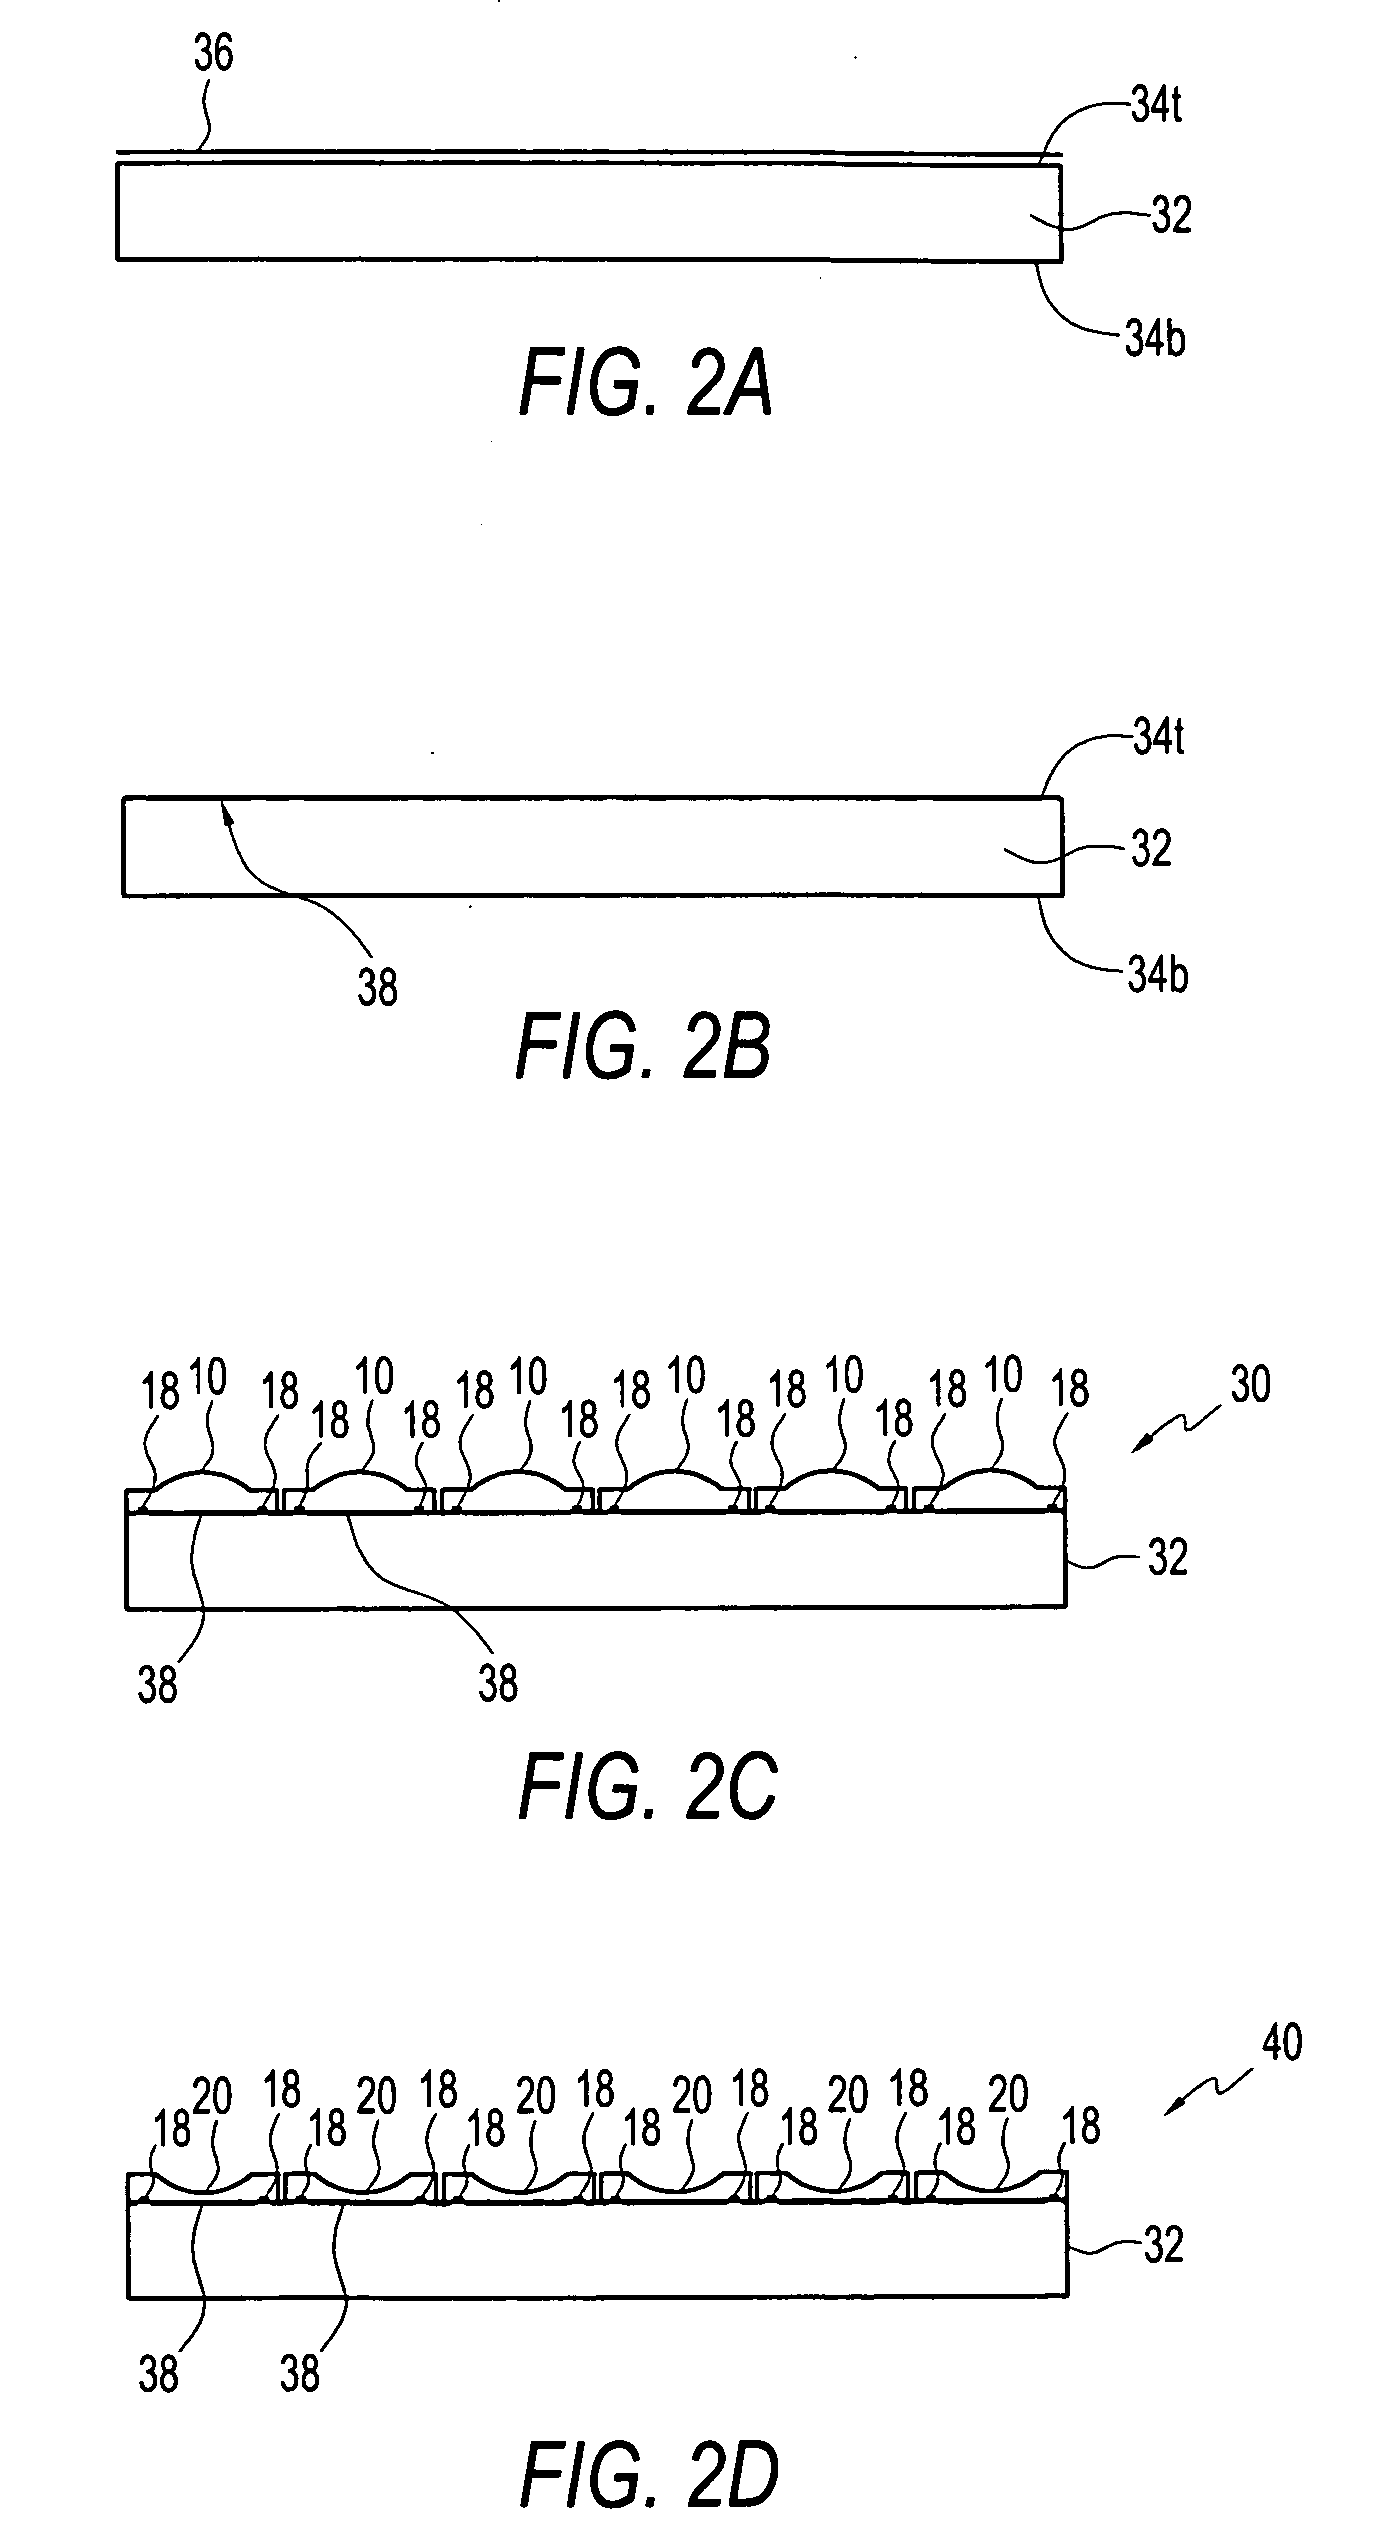 Lens master devices, lens structures, imaging devices, and methods and apparatuses of making the same